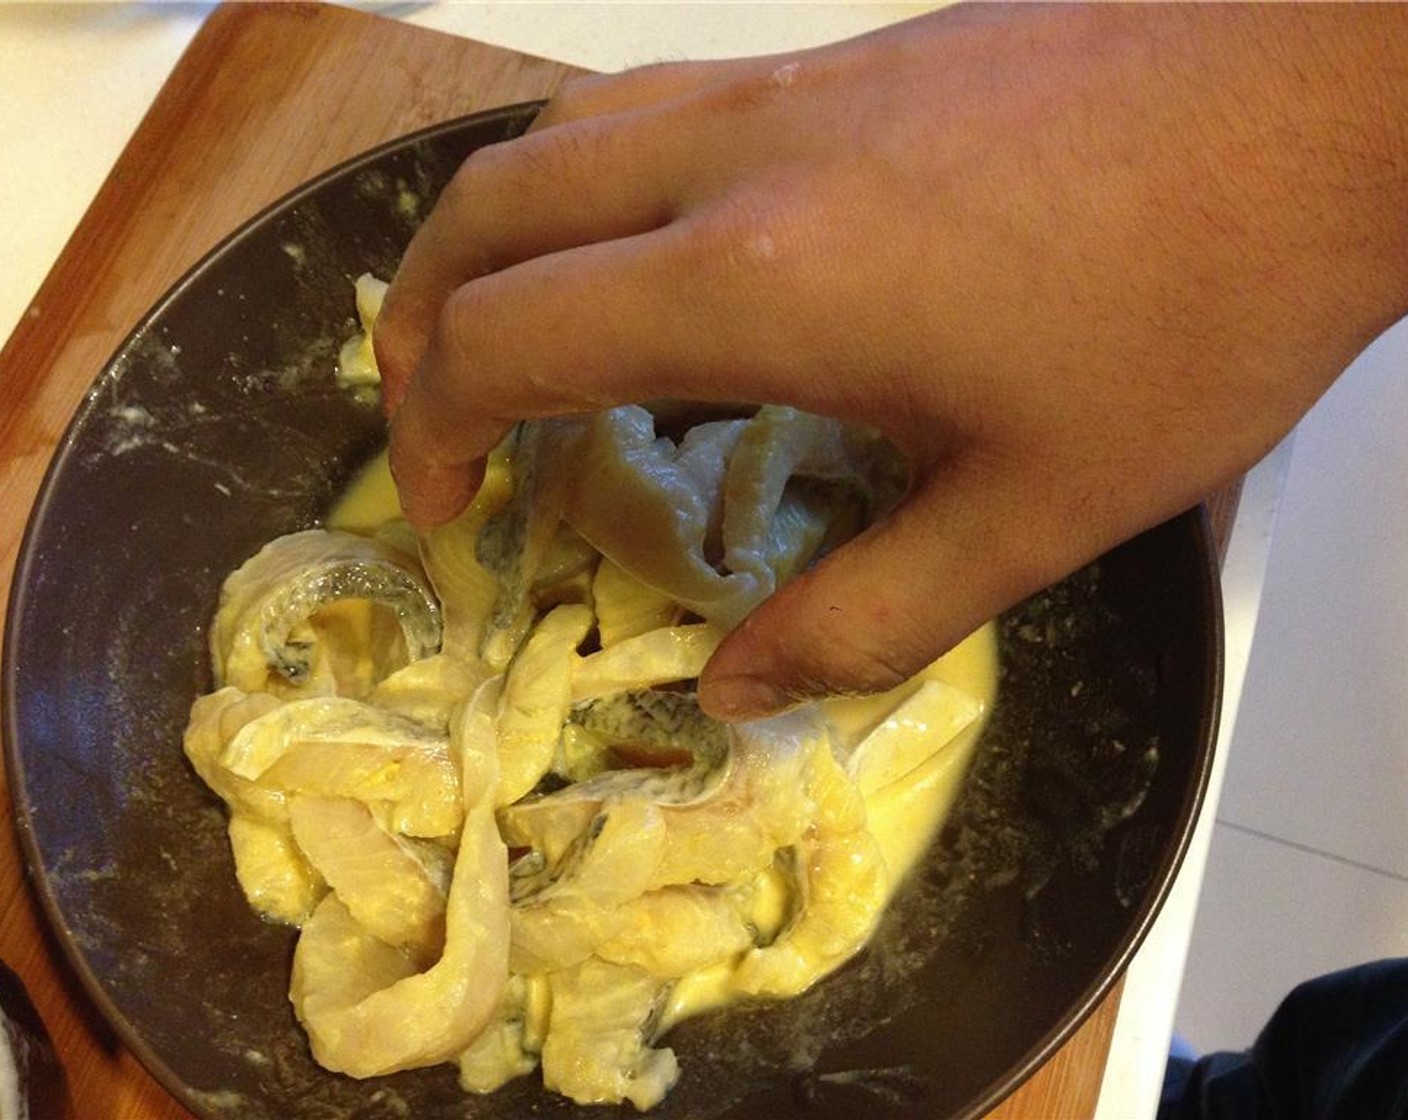 step 4 Add the fish and massage it into the cornstarch mixture. Let it marinate for 10 minutes.